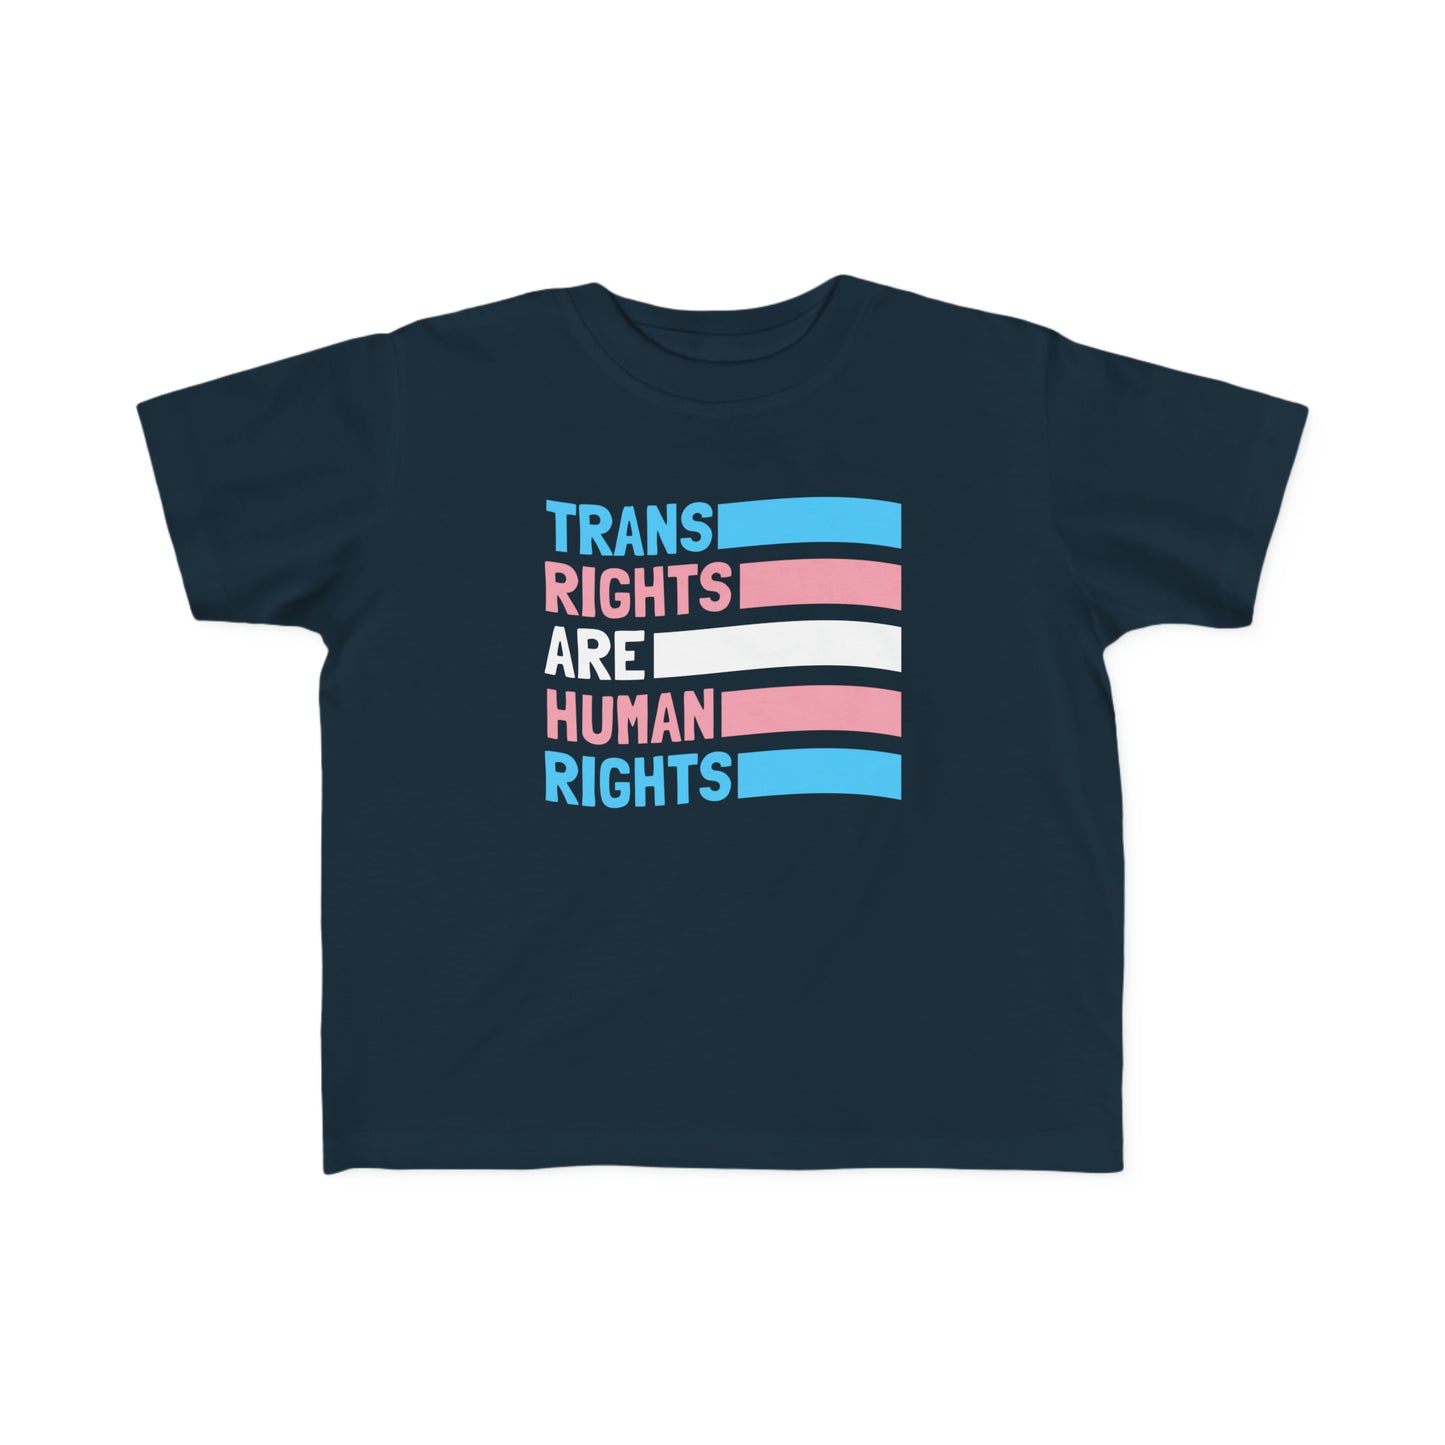 “Trans Rights Are Human Rights” Toddler's Tee